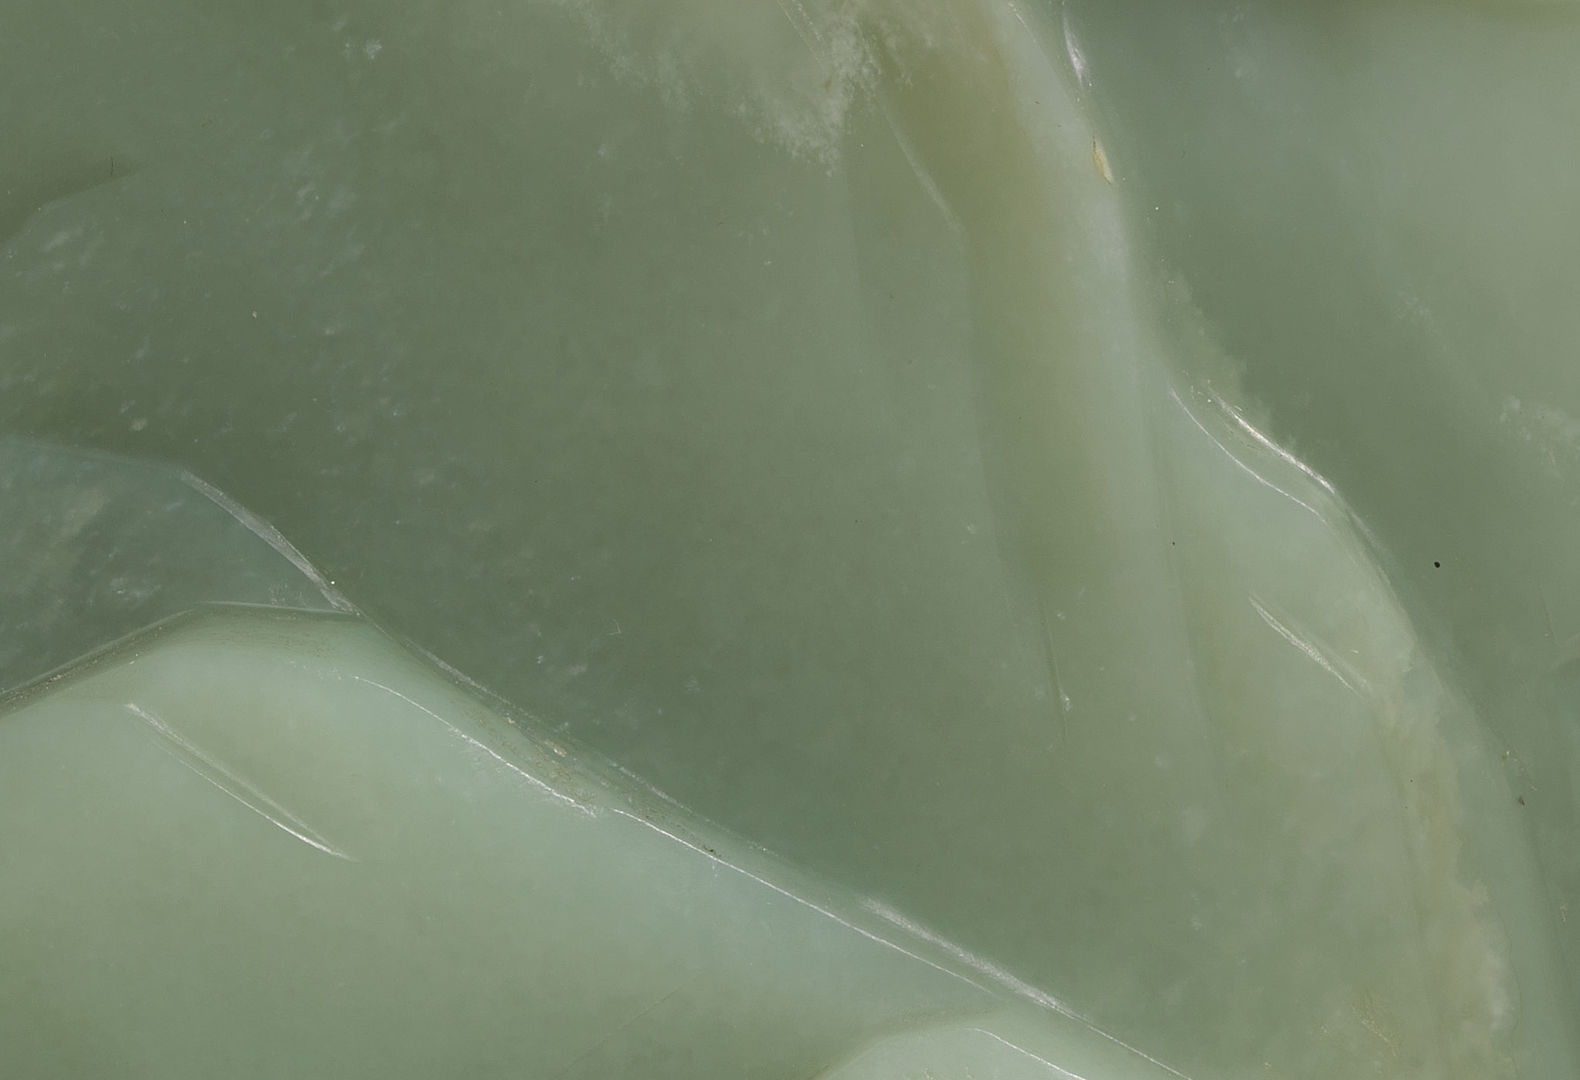 Extreme close-up of a carved piece of green jade